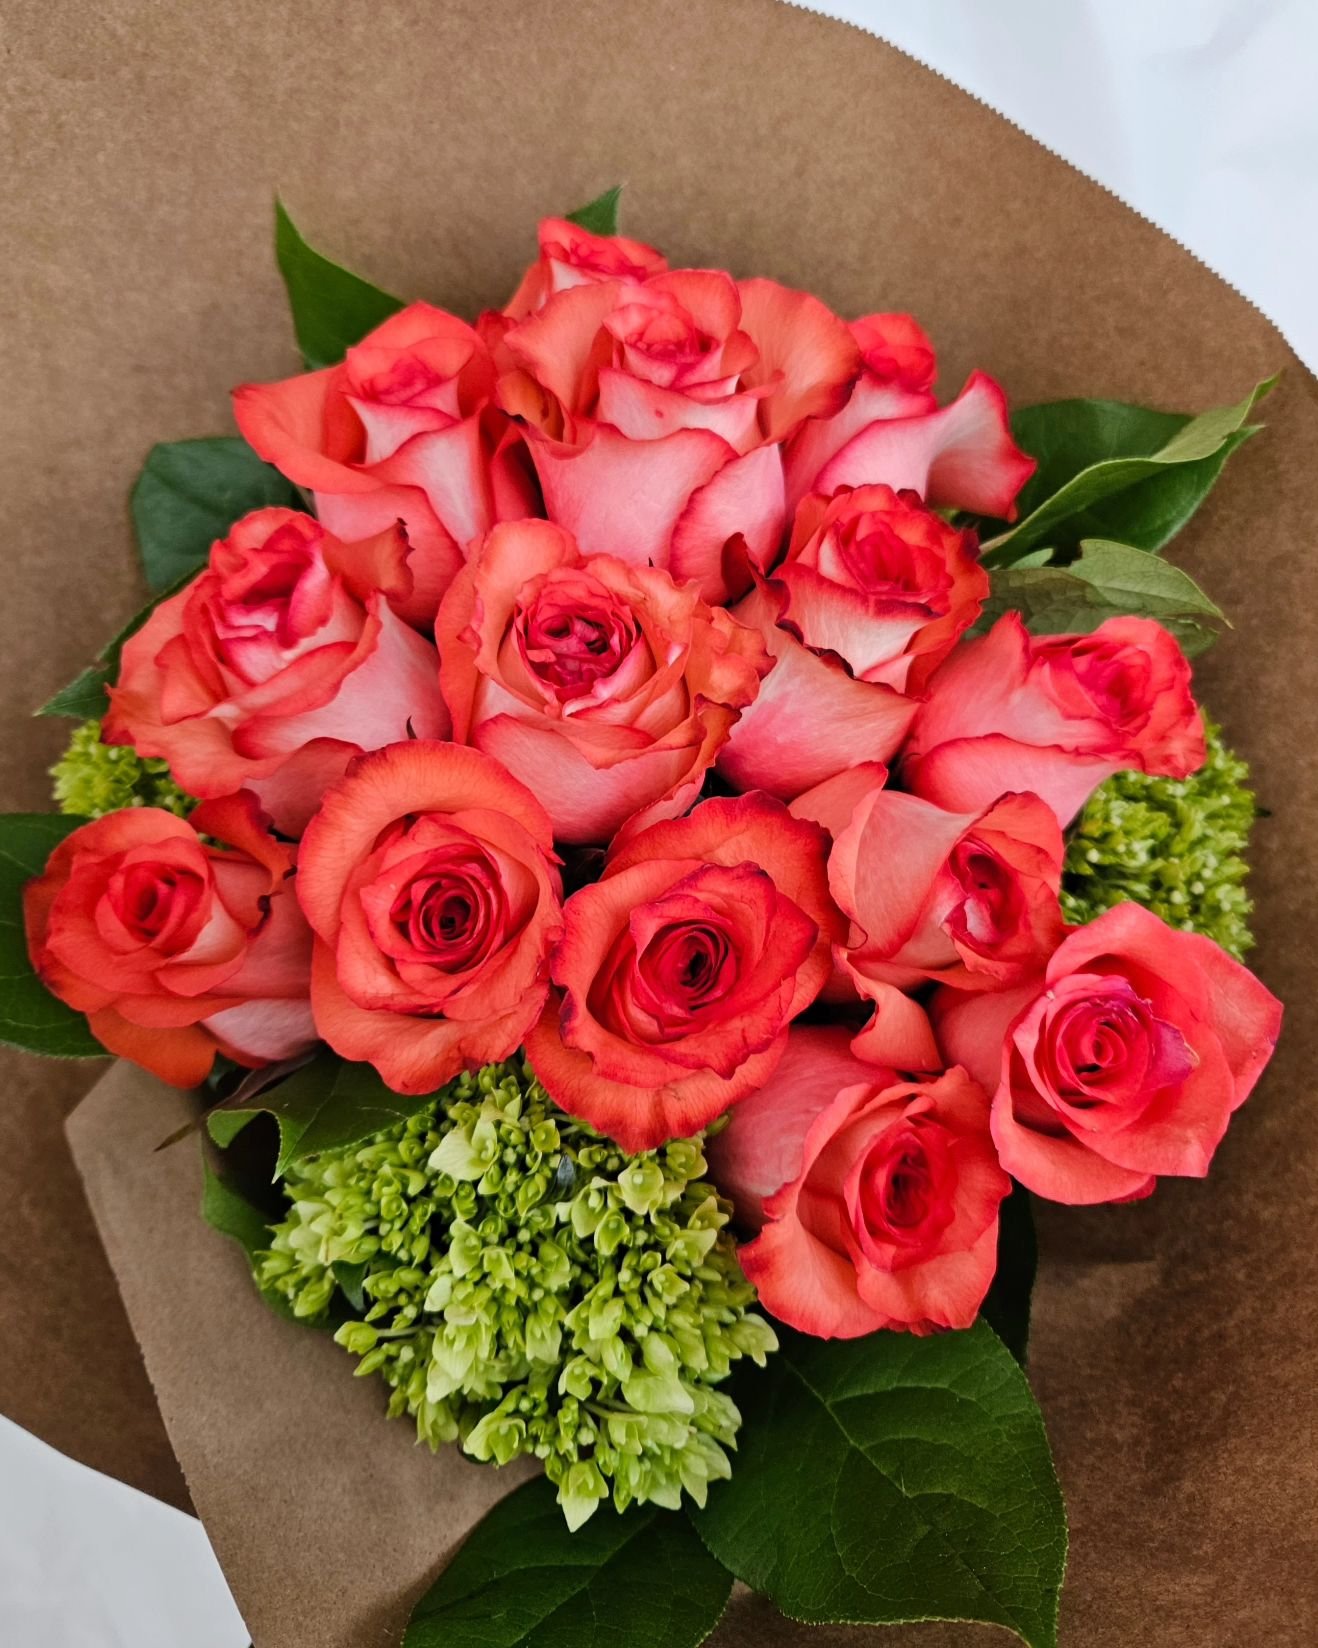 Shop roses by the dozen online 🌹 FREE next day delivery in NYC 

Perfect for Mother's Day and all occasions. Glass vase and gift wrapping included ✨️